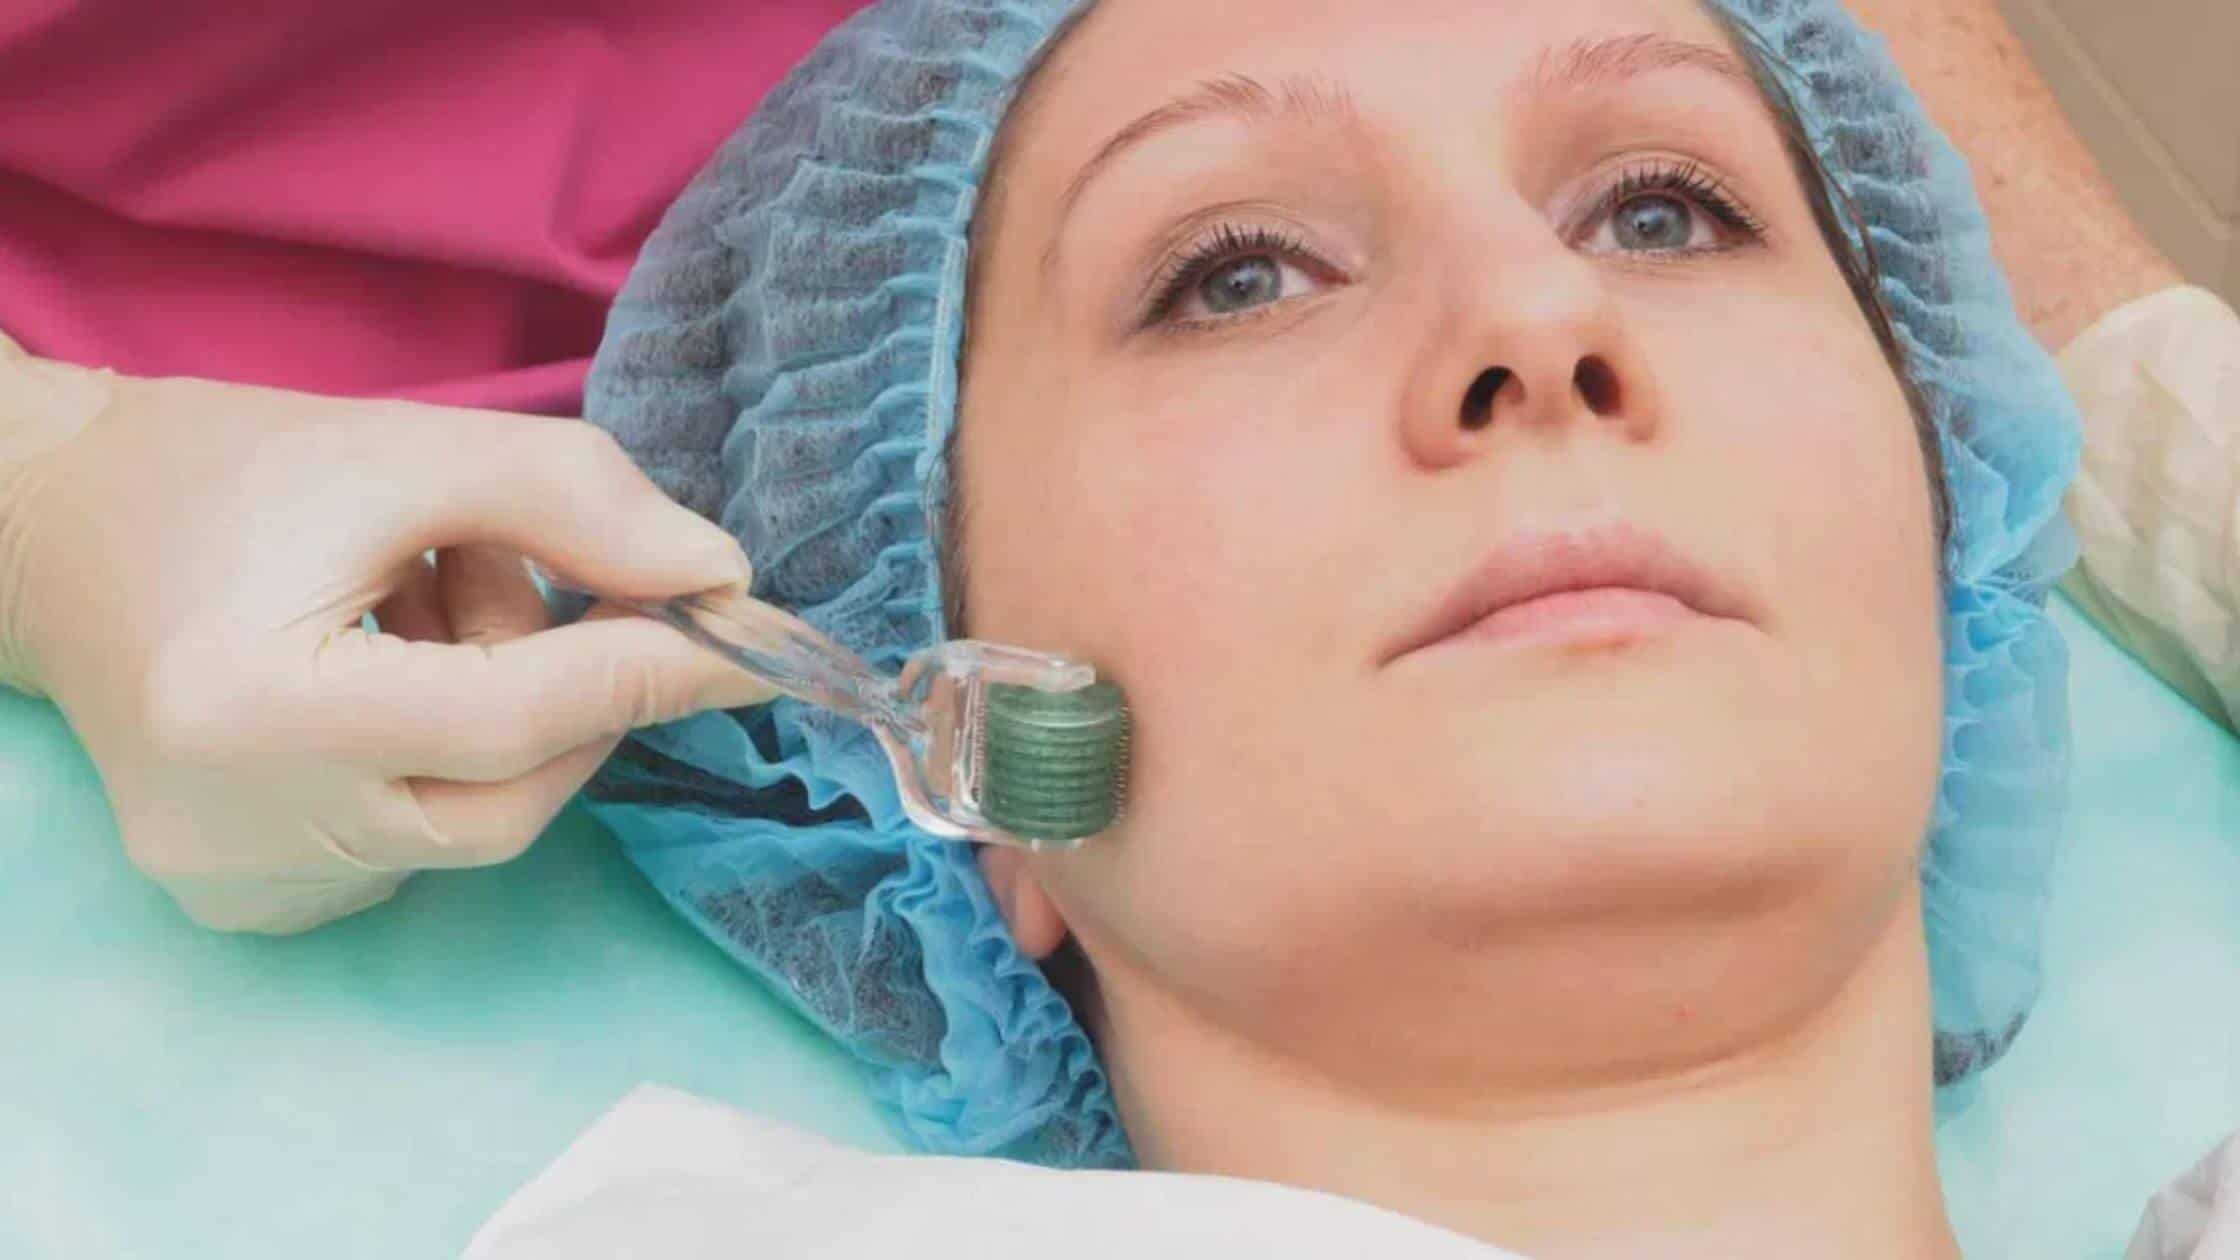 Surgery Scars Can Be Improved By Micro-Needling